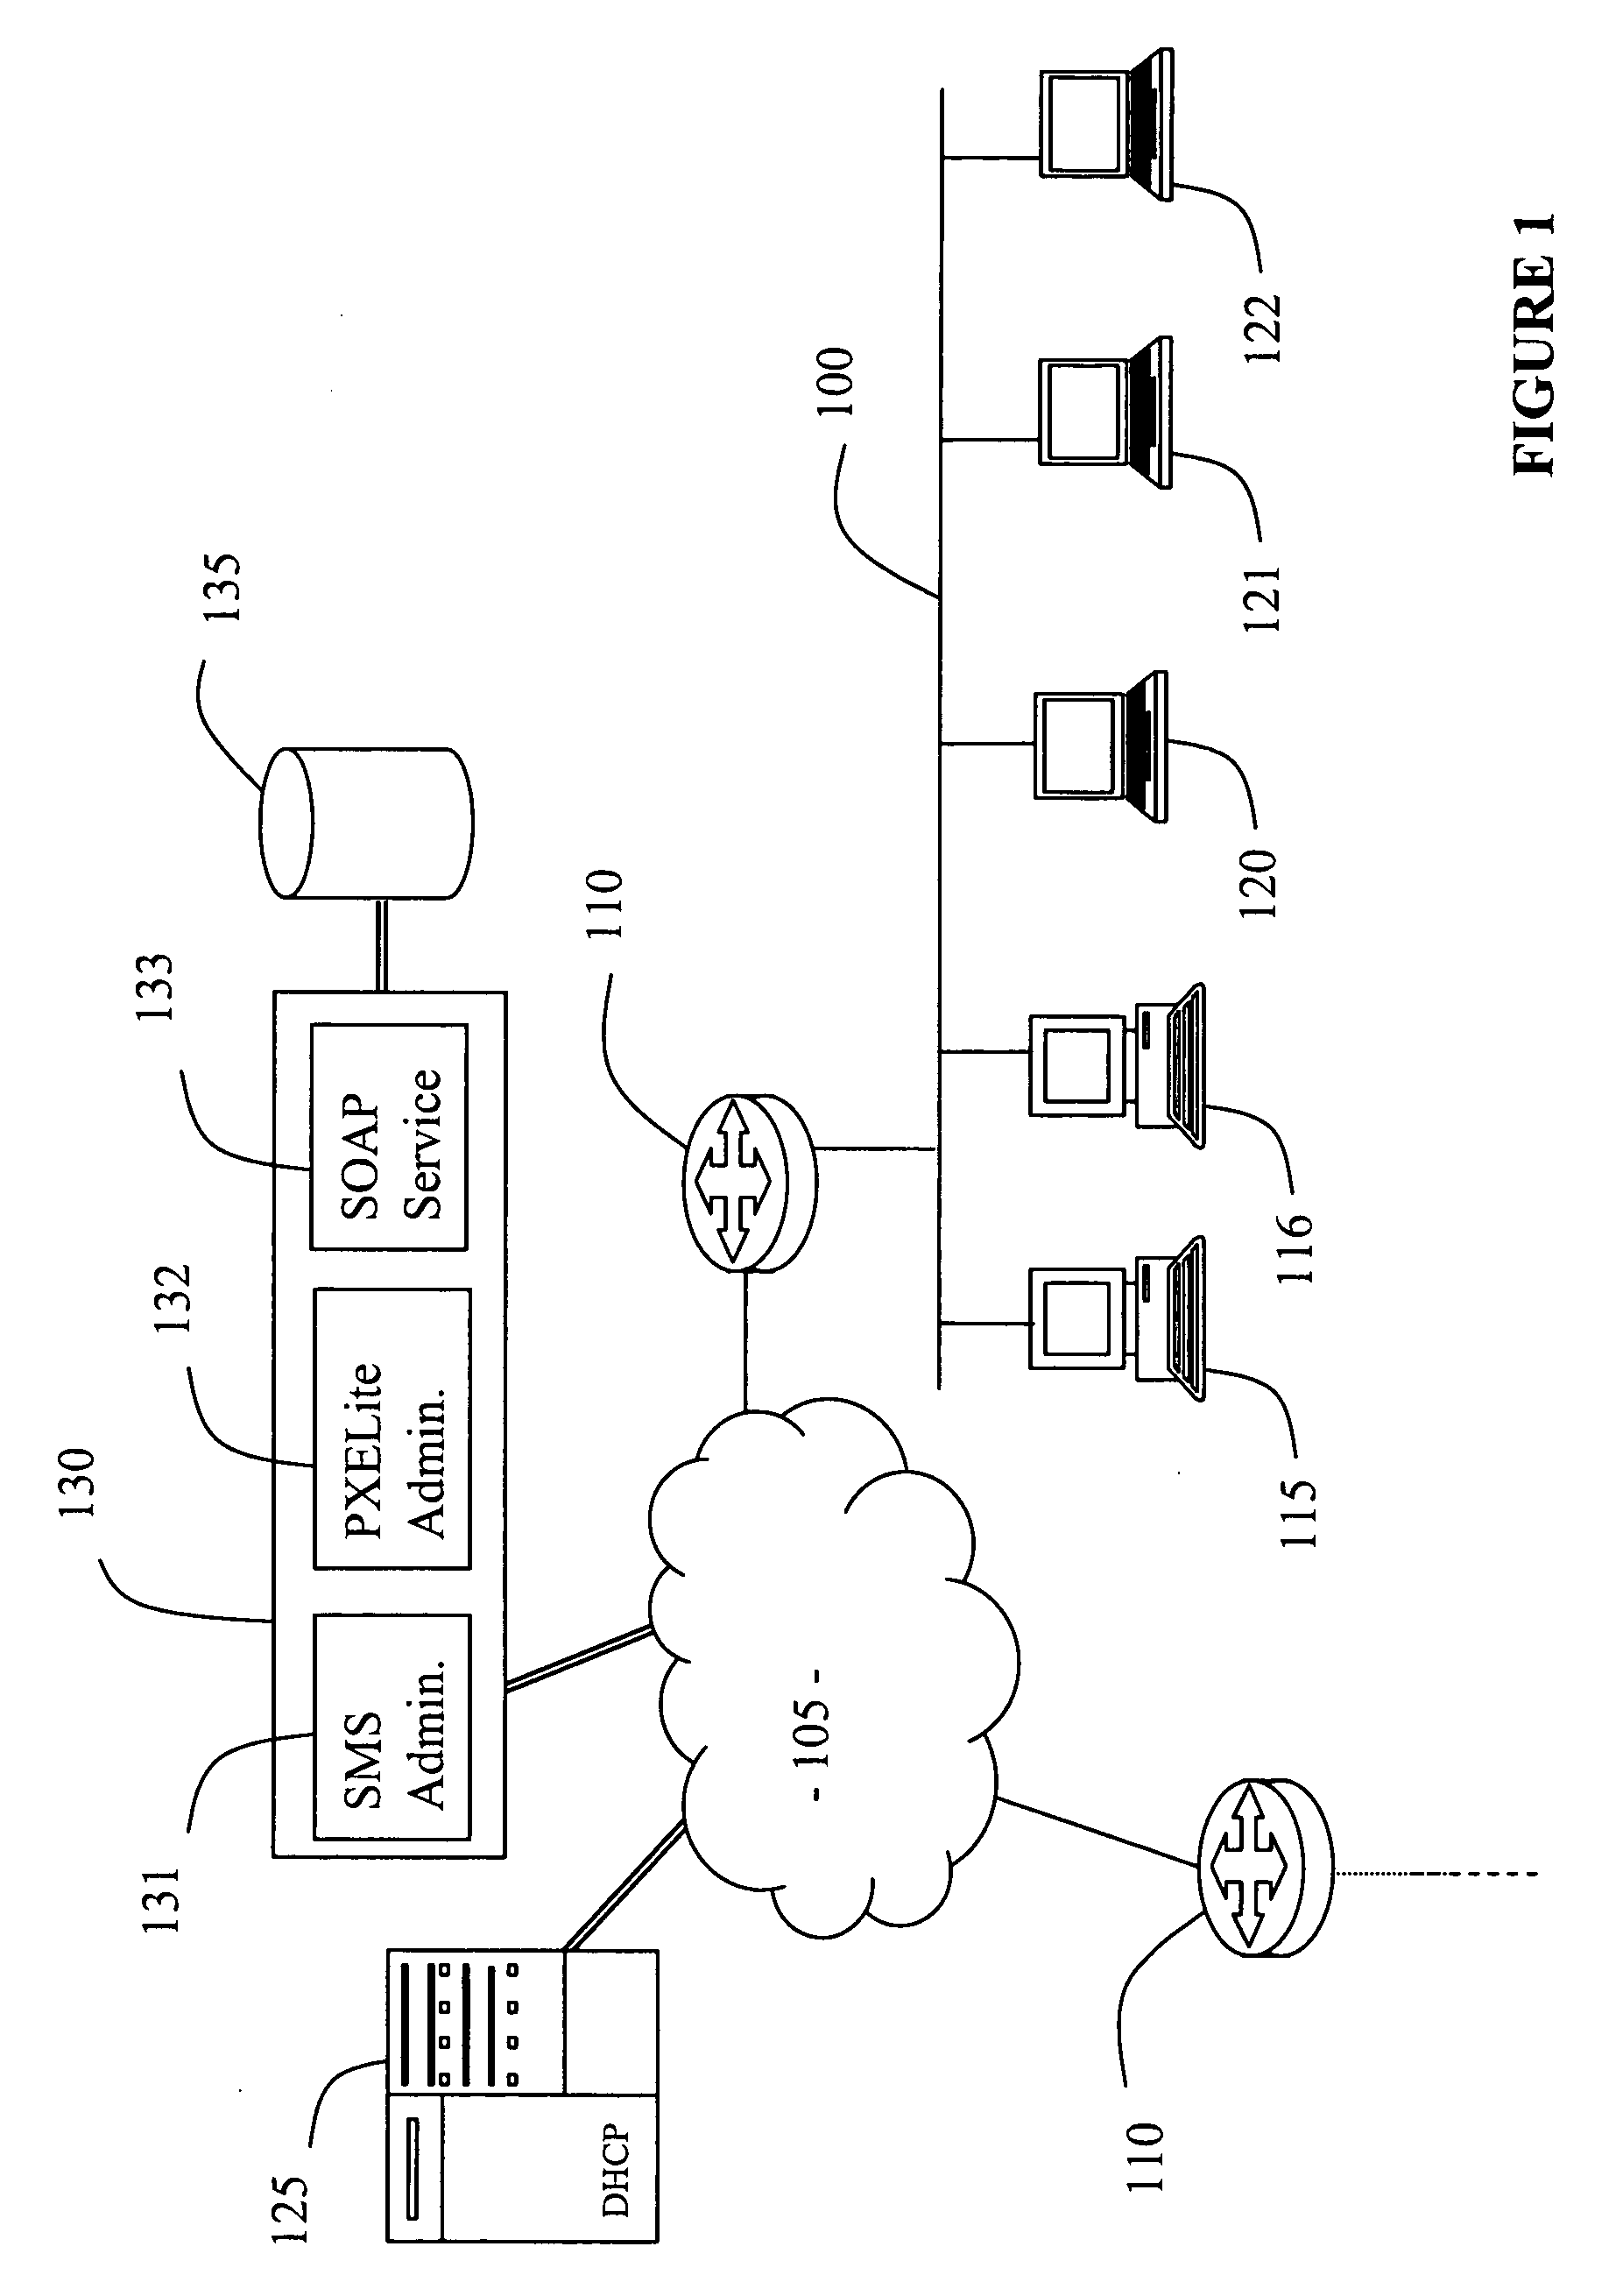 Network booting apparatus and method